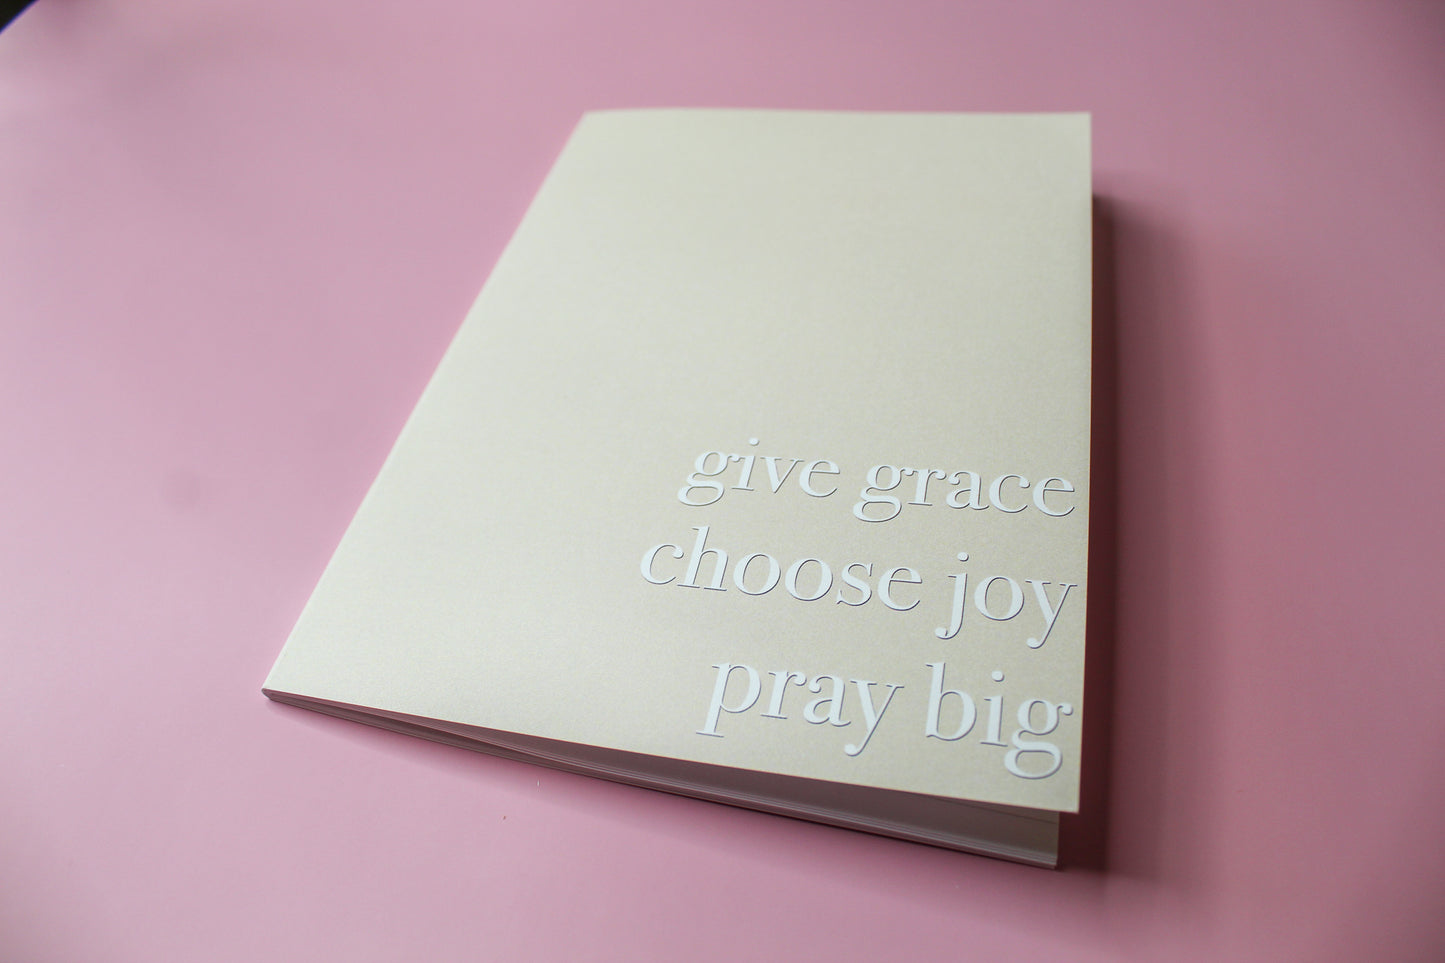  Give Grace, Choose Joy, Pray Big  journal is great for the office, to stick in your purse or to use as a prayer journal. 